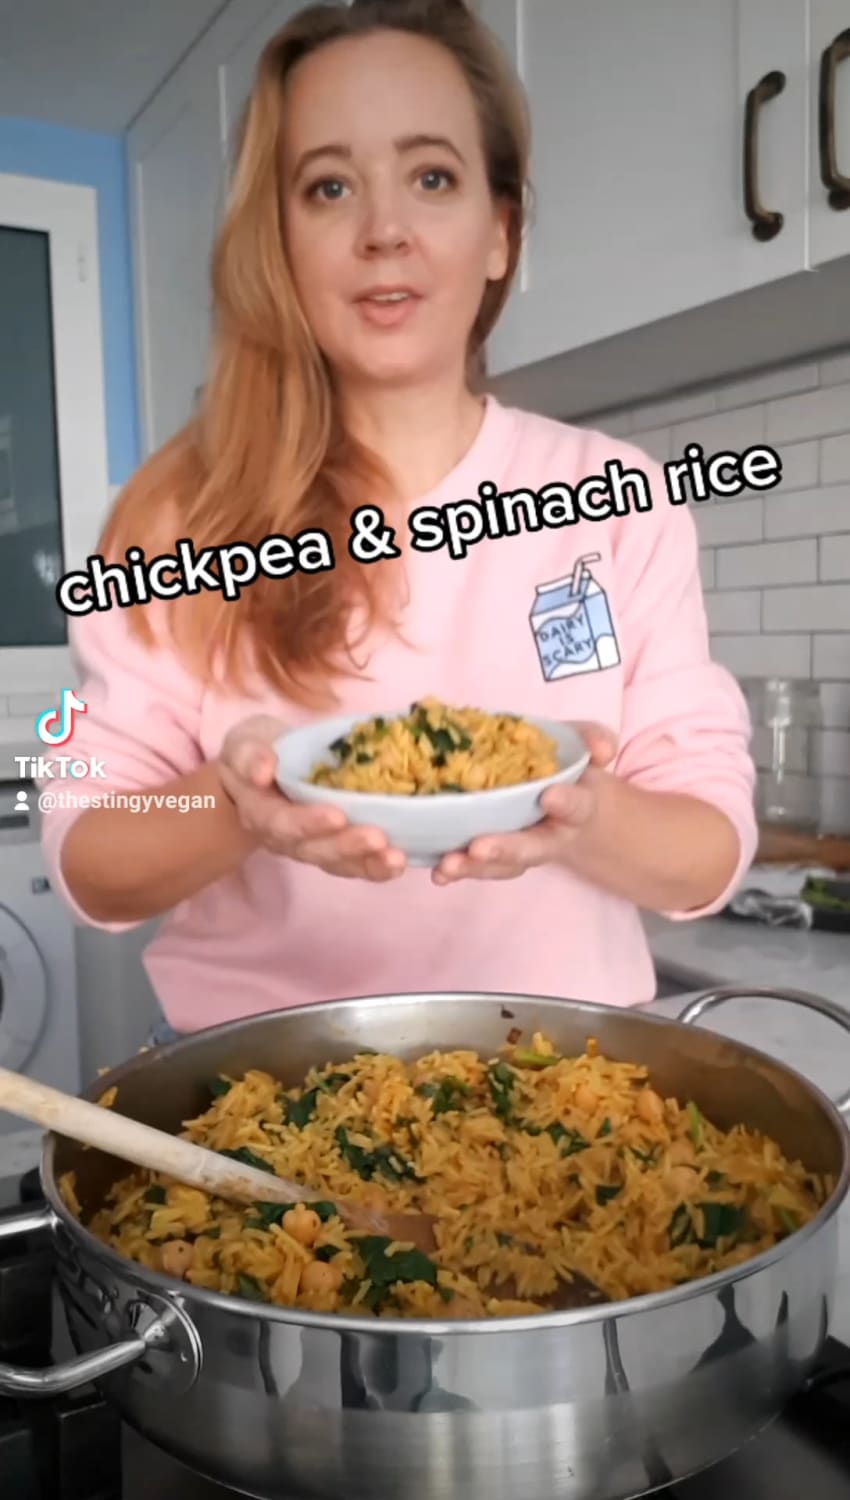 Chickpea Spinach Rice - super quick and easy dinner idea!